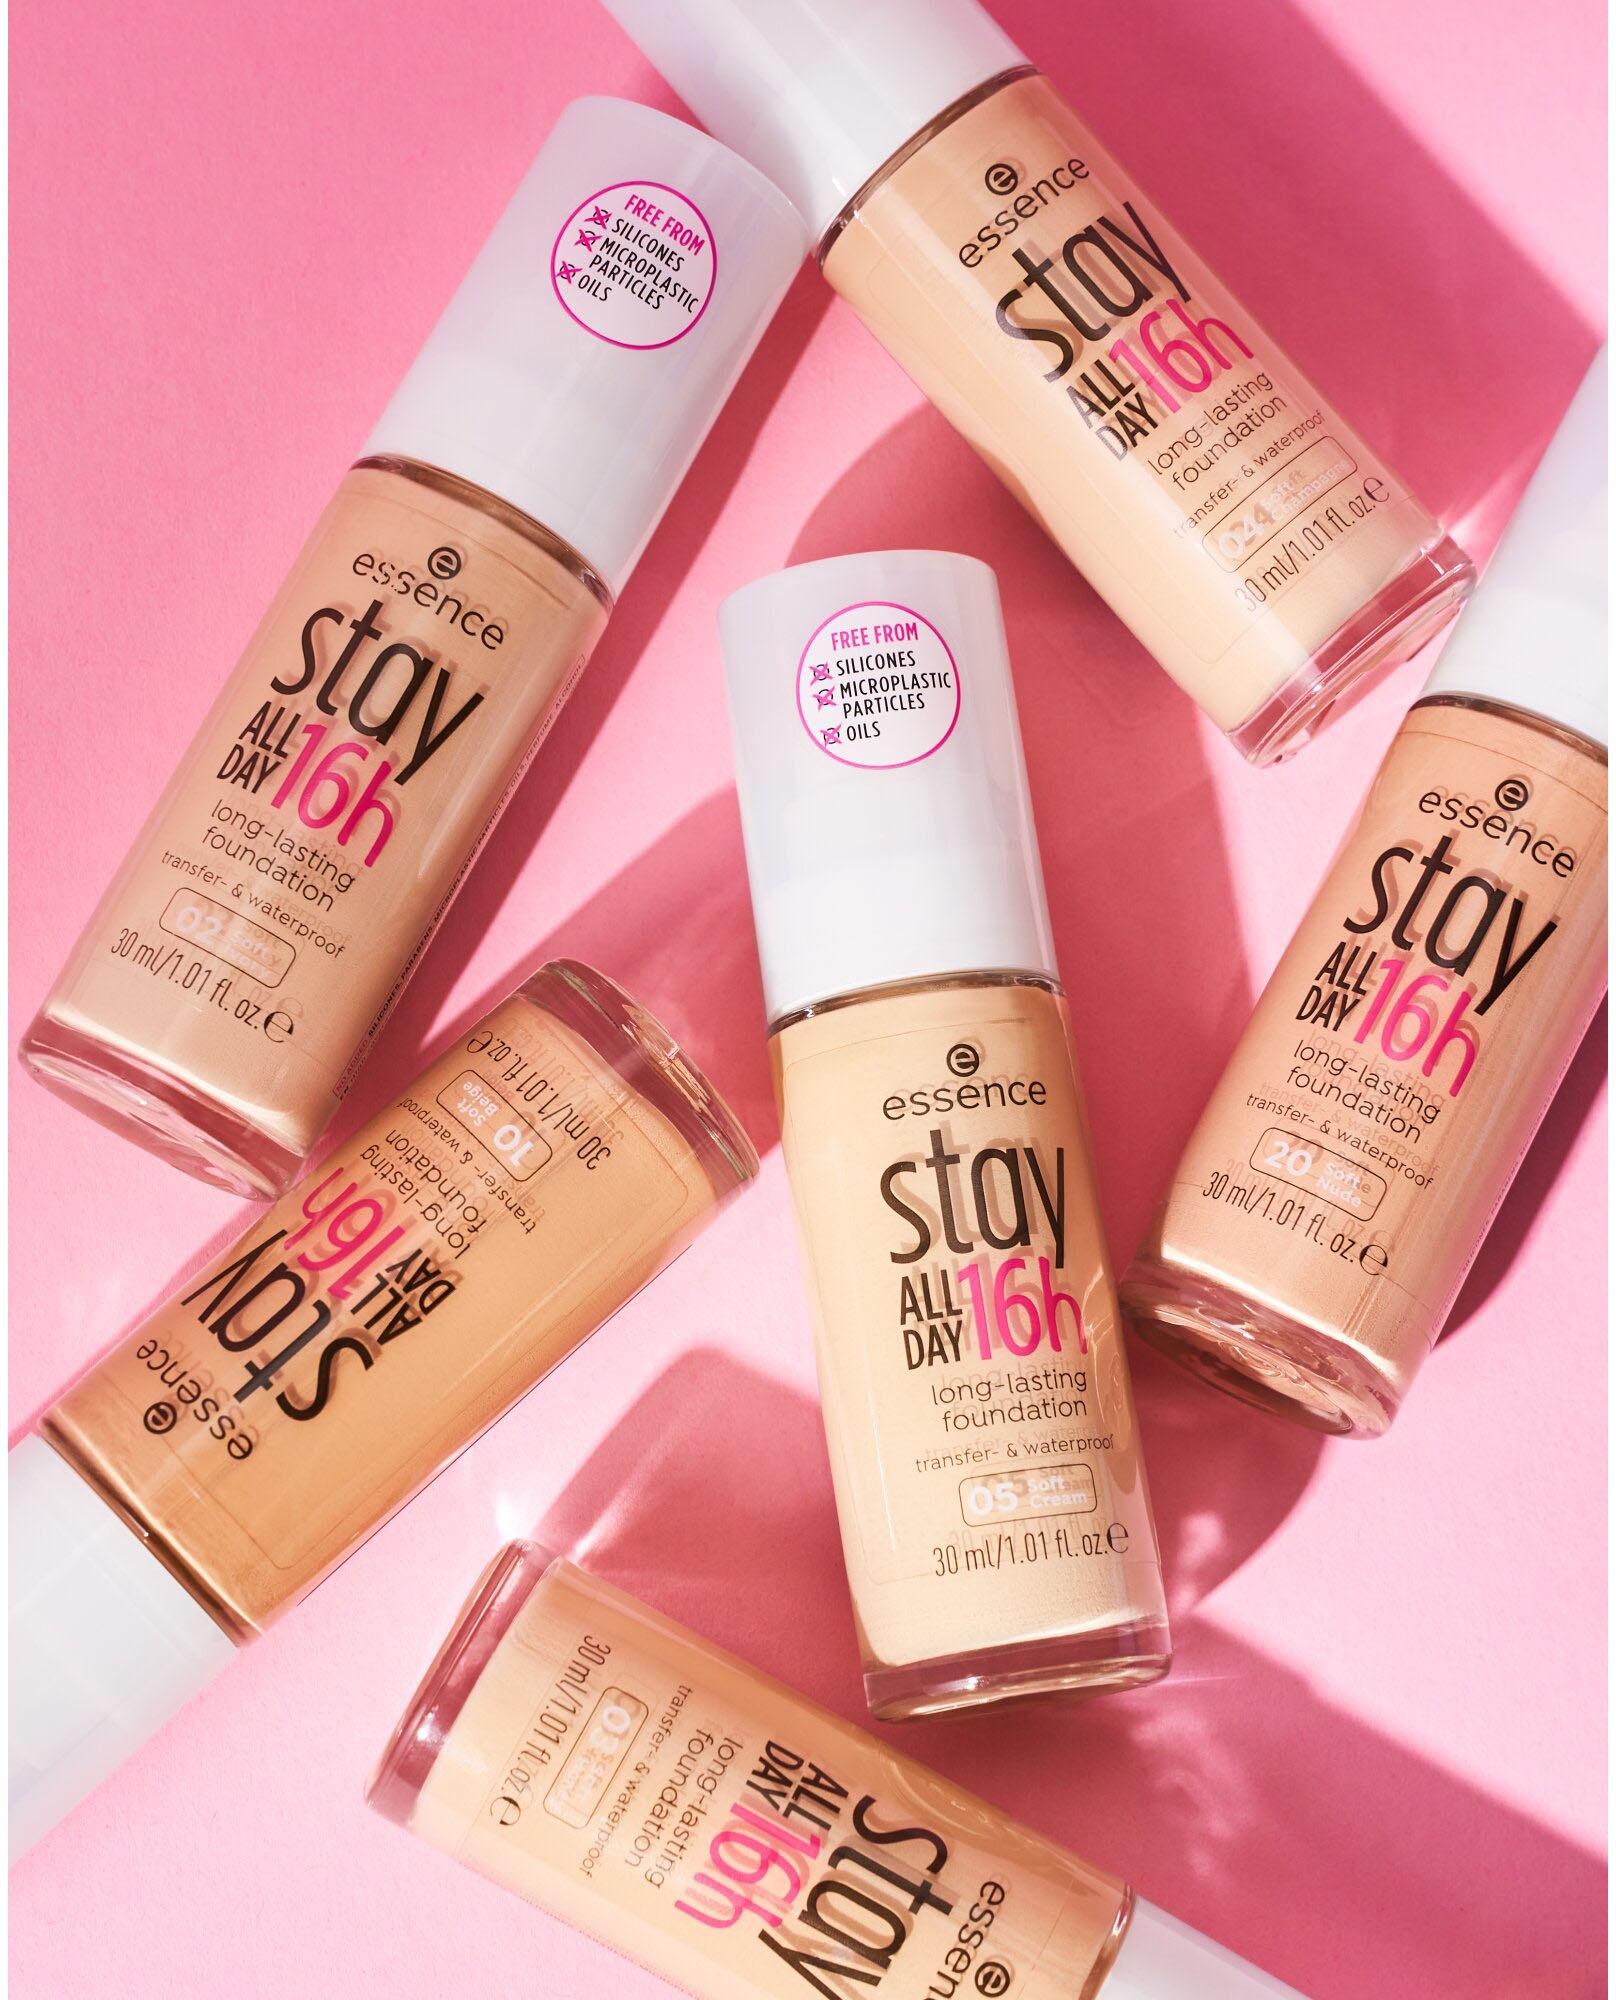 (Set, Essence 3 DAY »stay tlg.) Foundation 16h ♕ bei long-lasting«, ALL